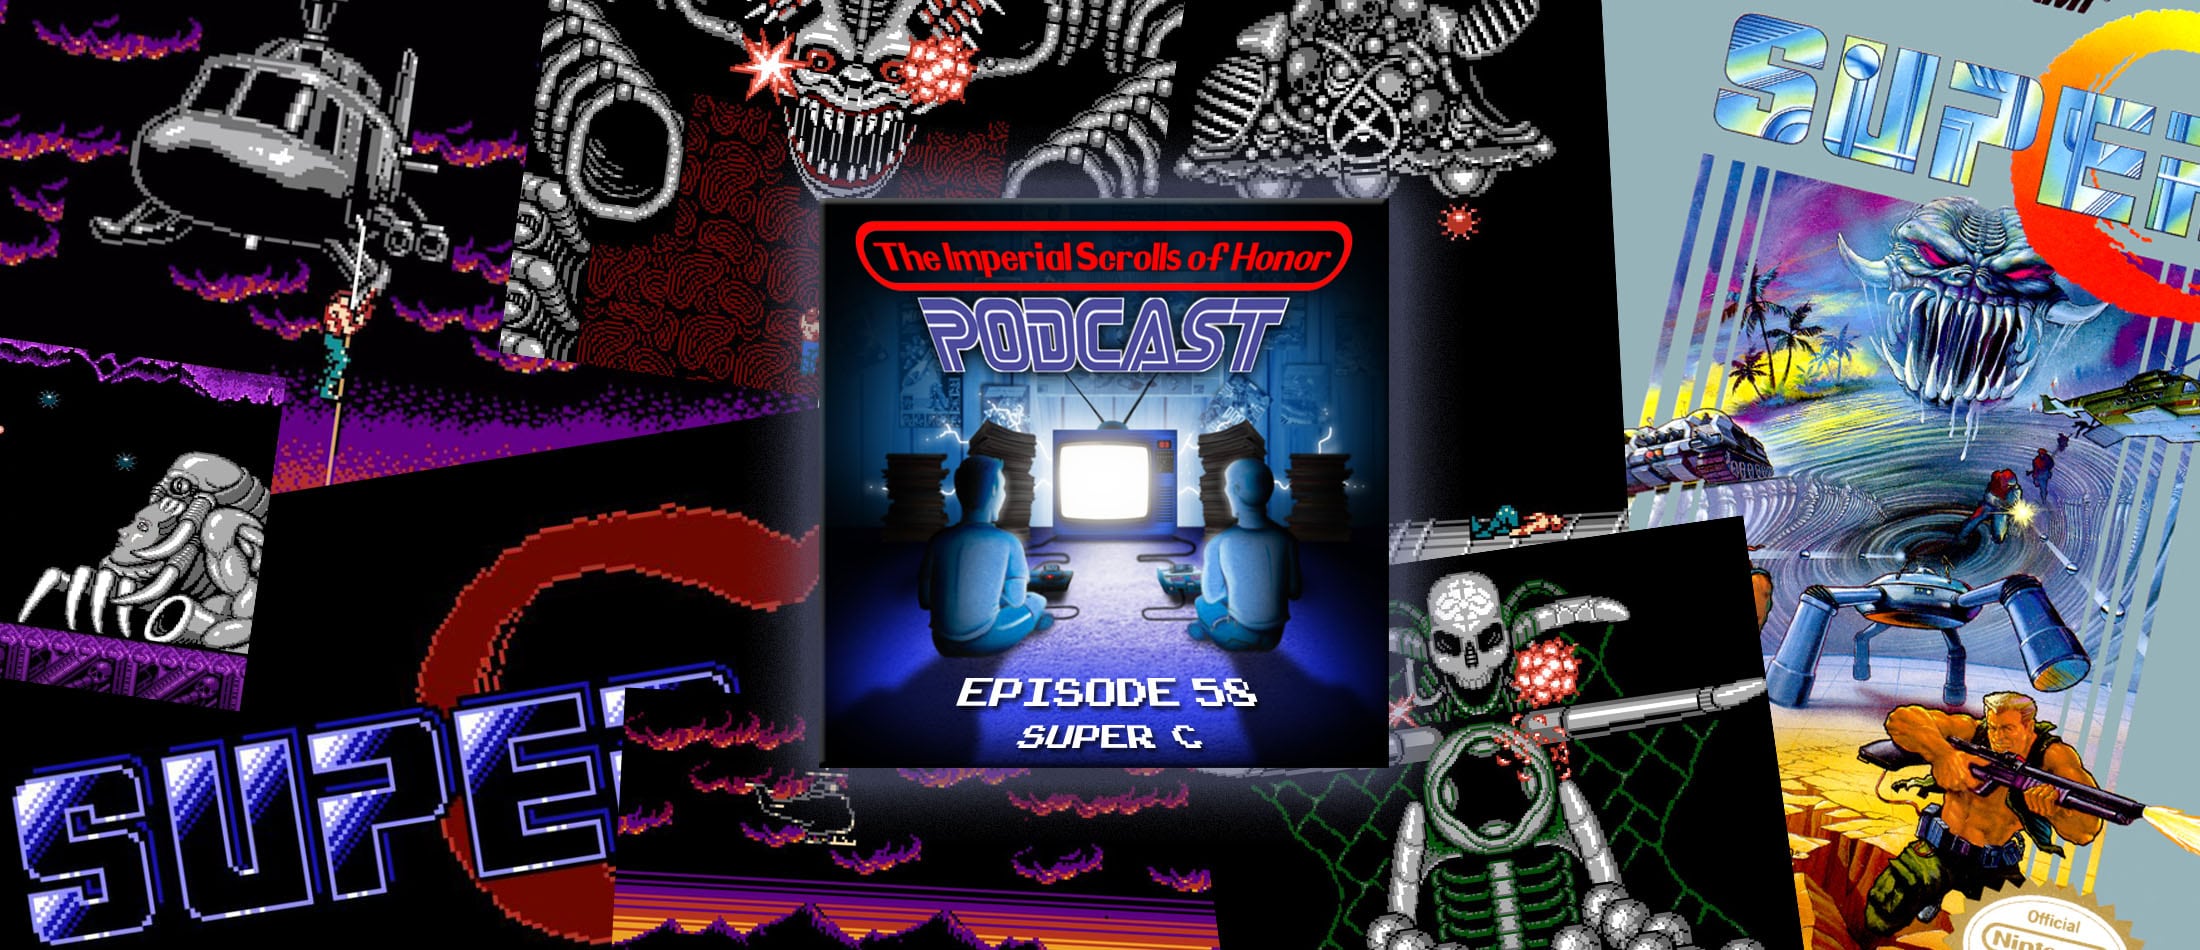 The Imperial Scrolls of Honor Podcast - Ep 58 - Super C (NES)